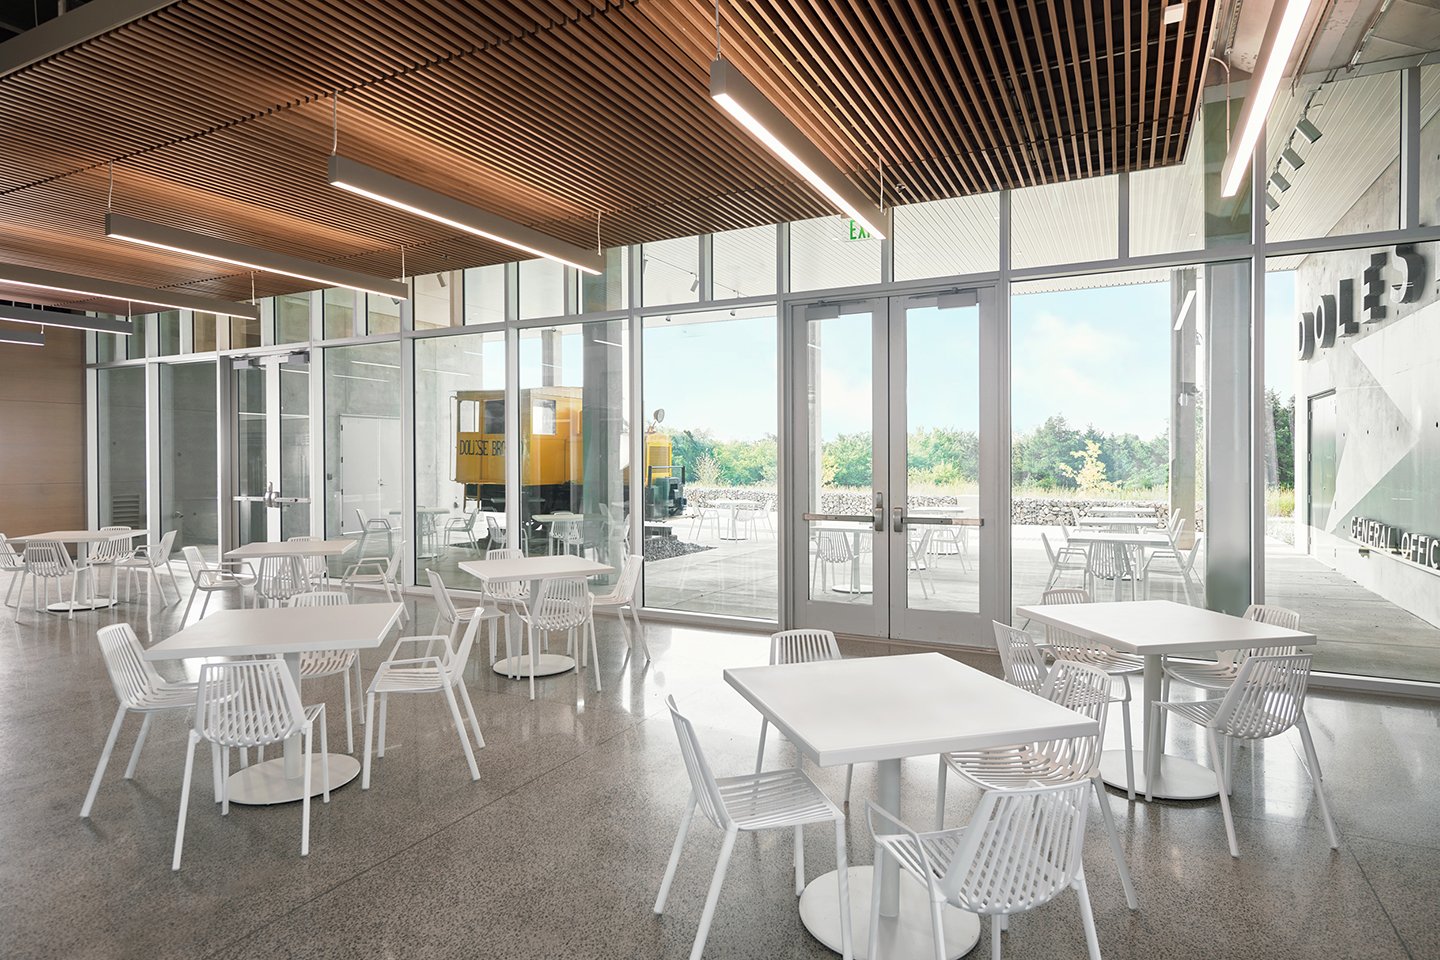 Haworth dining chairs in white in Dolese cafeteria